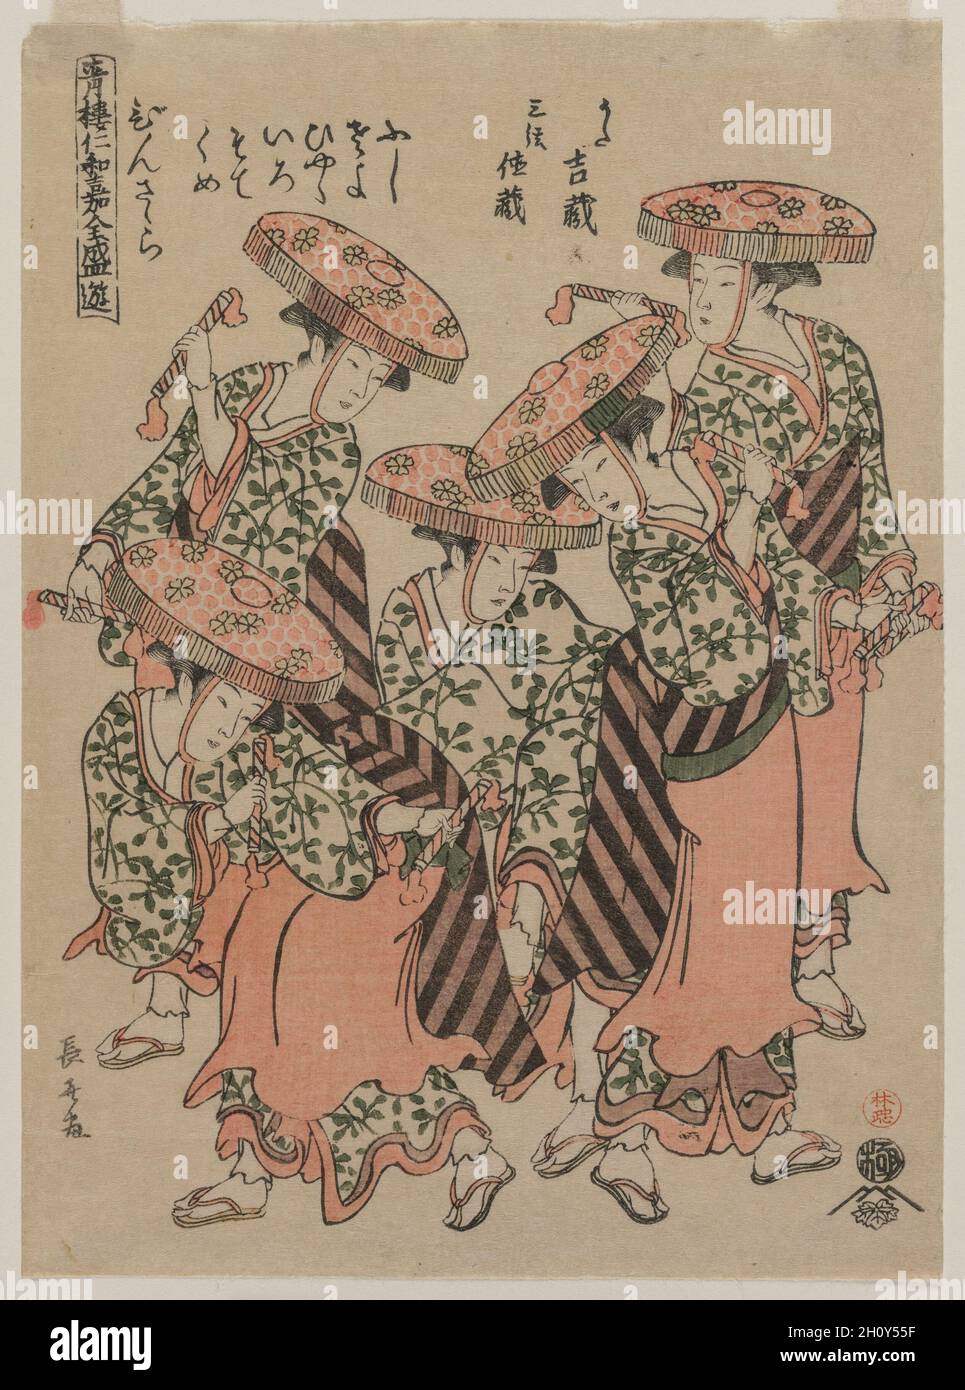 Binzasara, A Dance with Clappers (From the series Entertainments at the Height of the Niwaka Festival in the Pleasure Quarters), early 1790s. Eishōsai Chōki (Japanese). Color woodblock print; sheet: 24.5 x 18.2 cm (9 5/8 x 7 3/16 in.).  During the eighth lunar month of each year the geisha of the pleasure quarters would form themselves into groups and proceed around the quarter performing dances and skits. It seems likely that woodblock prints featuring the Niwaka Festival were purchased as souvenirs of the occasion. The Binzasara is a ritual dance related to agriculture and fertility performe Stock Photo